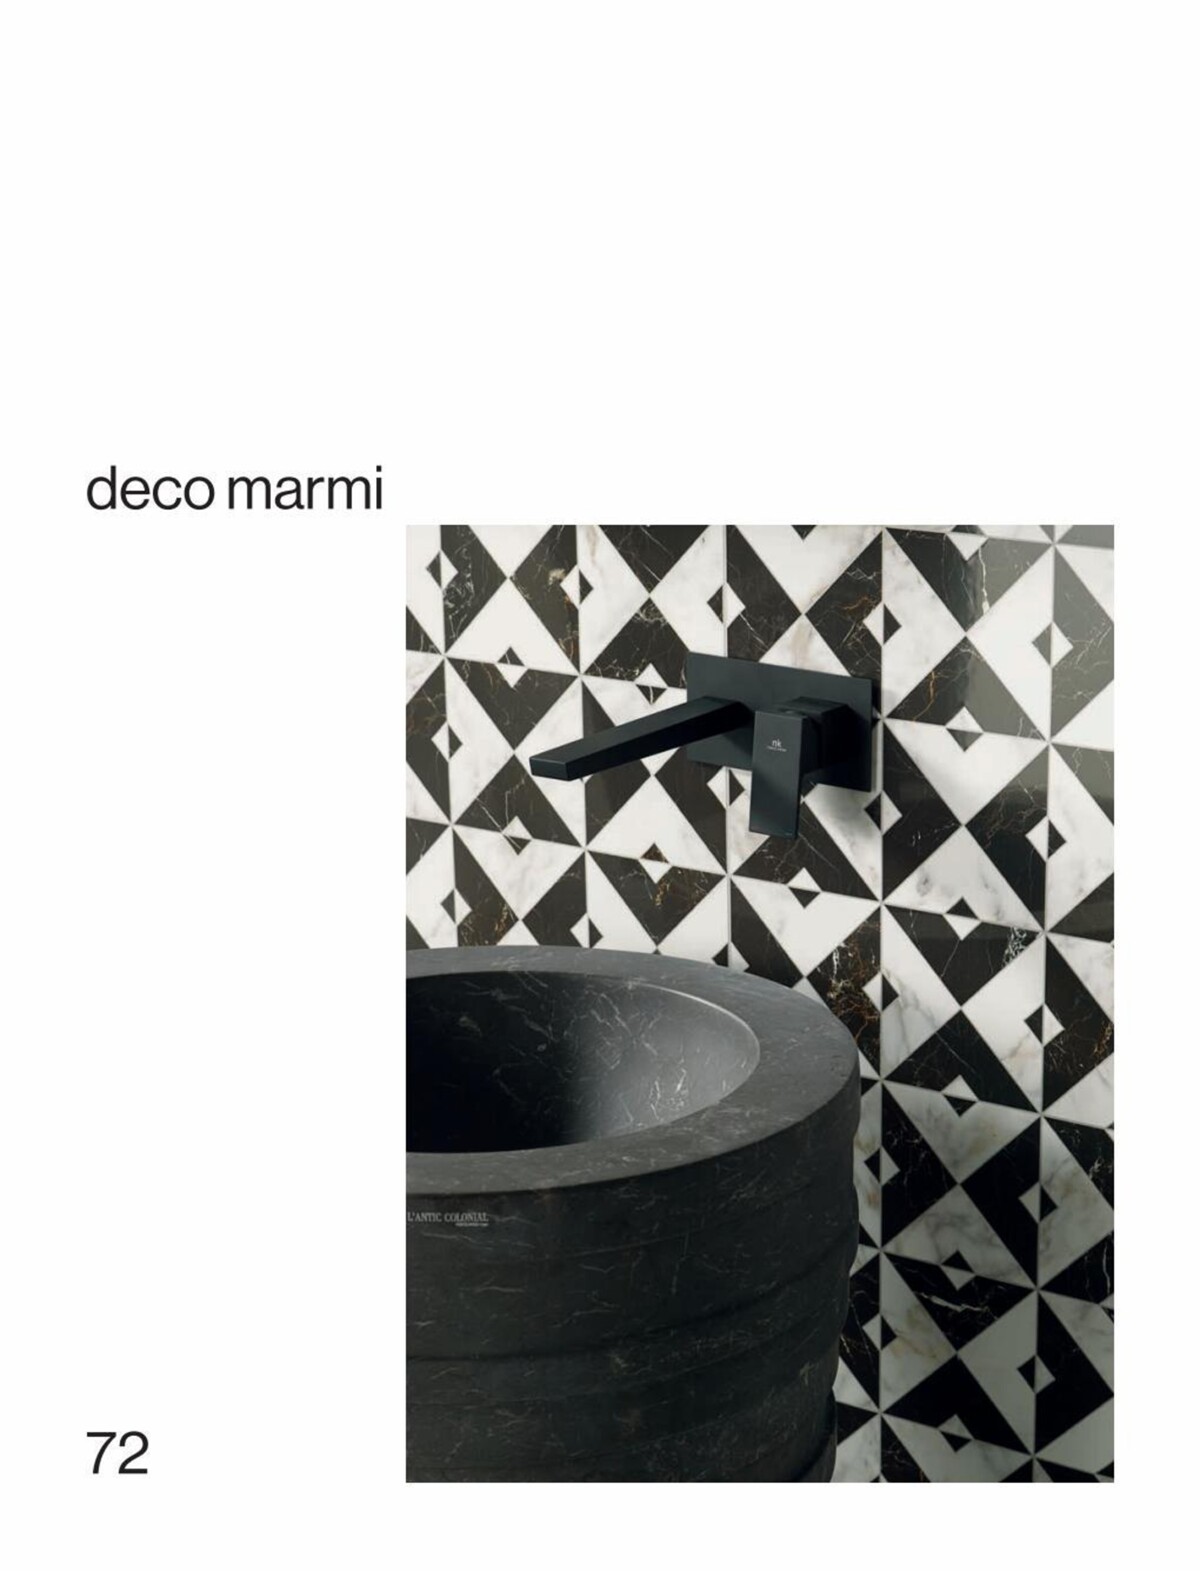 Catalogue MARMI,a ceramic tile that echoes the purity of marble, page 00072